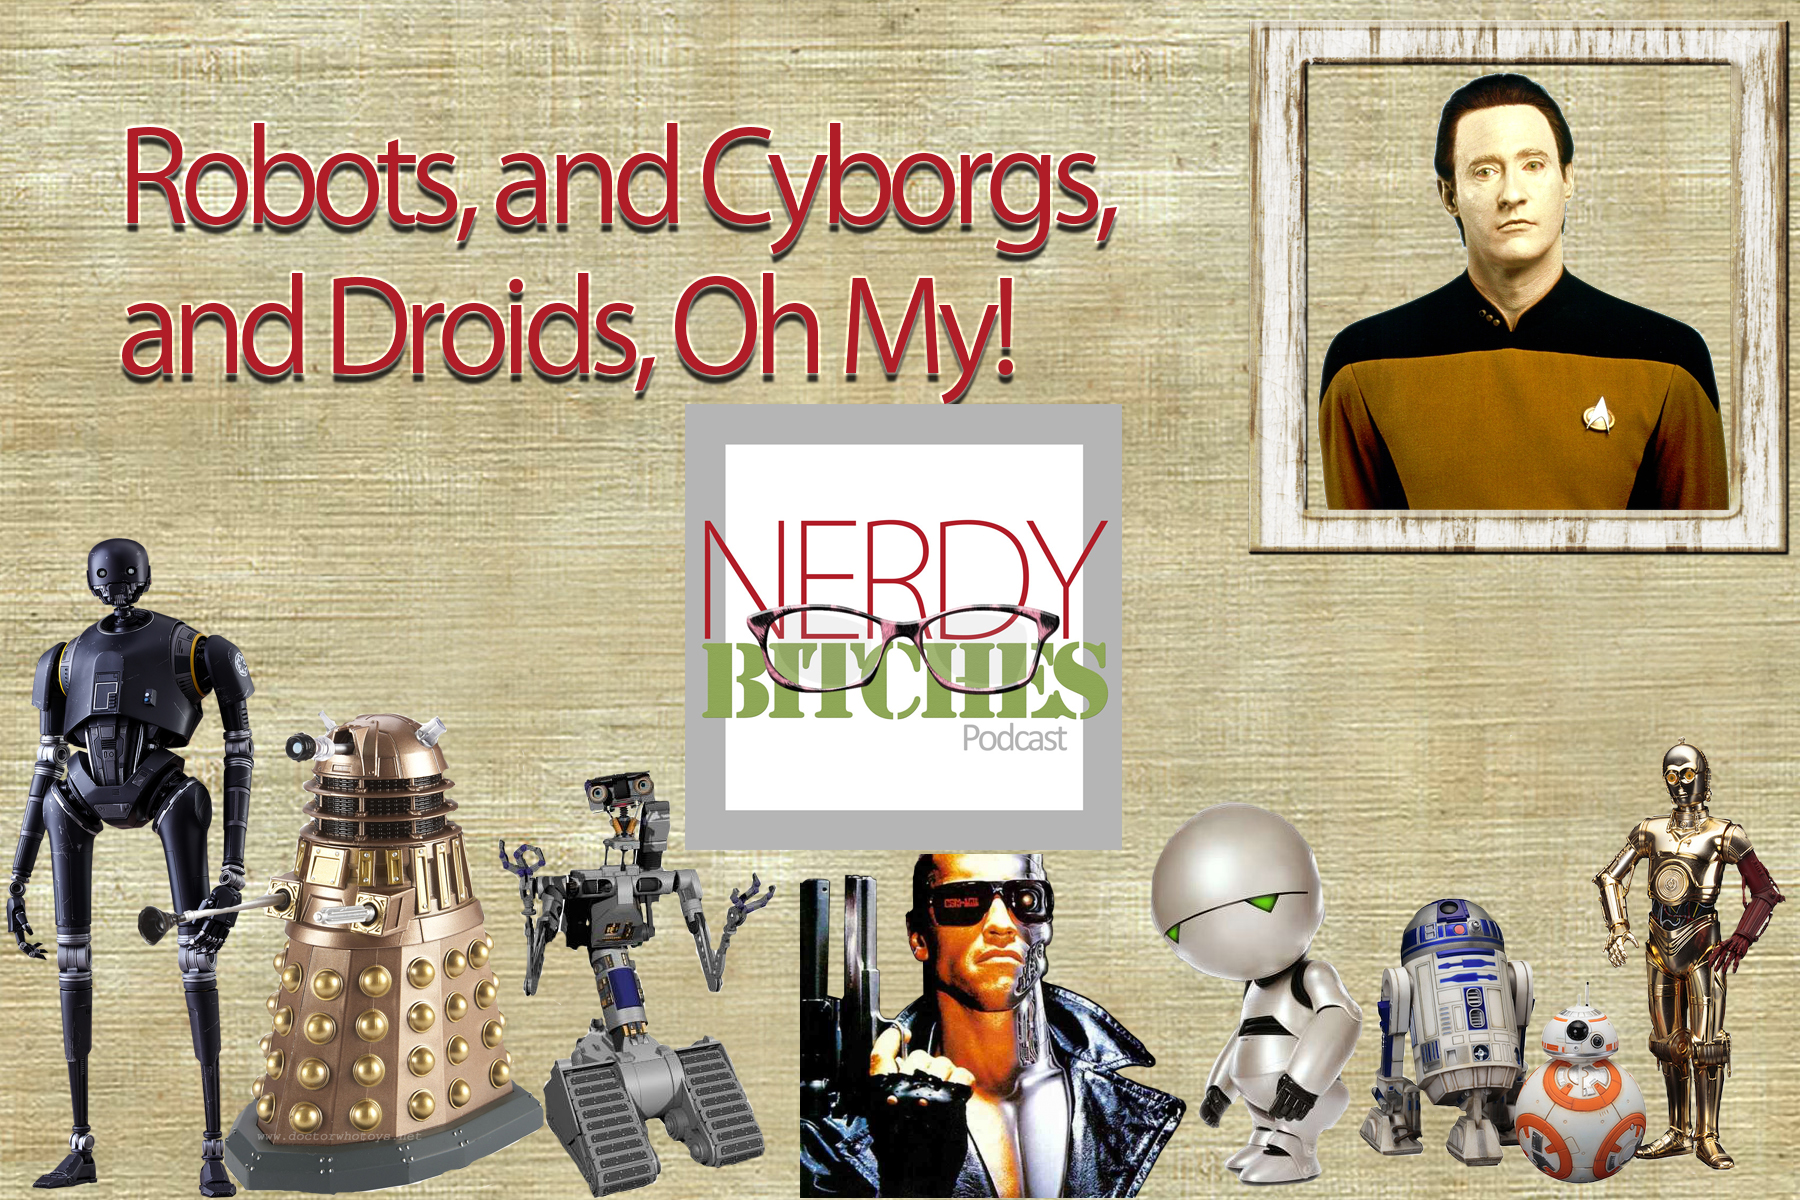 Robots and cyborgs and droids oh my